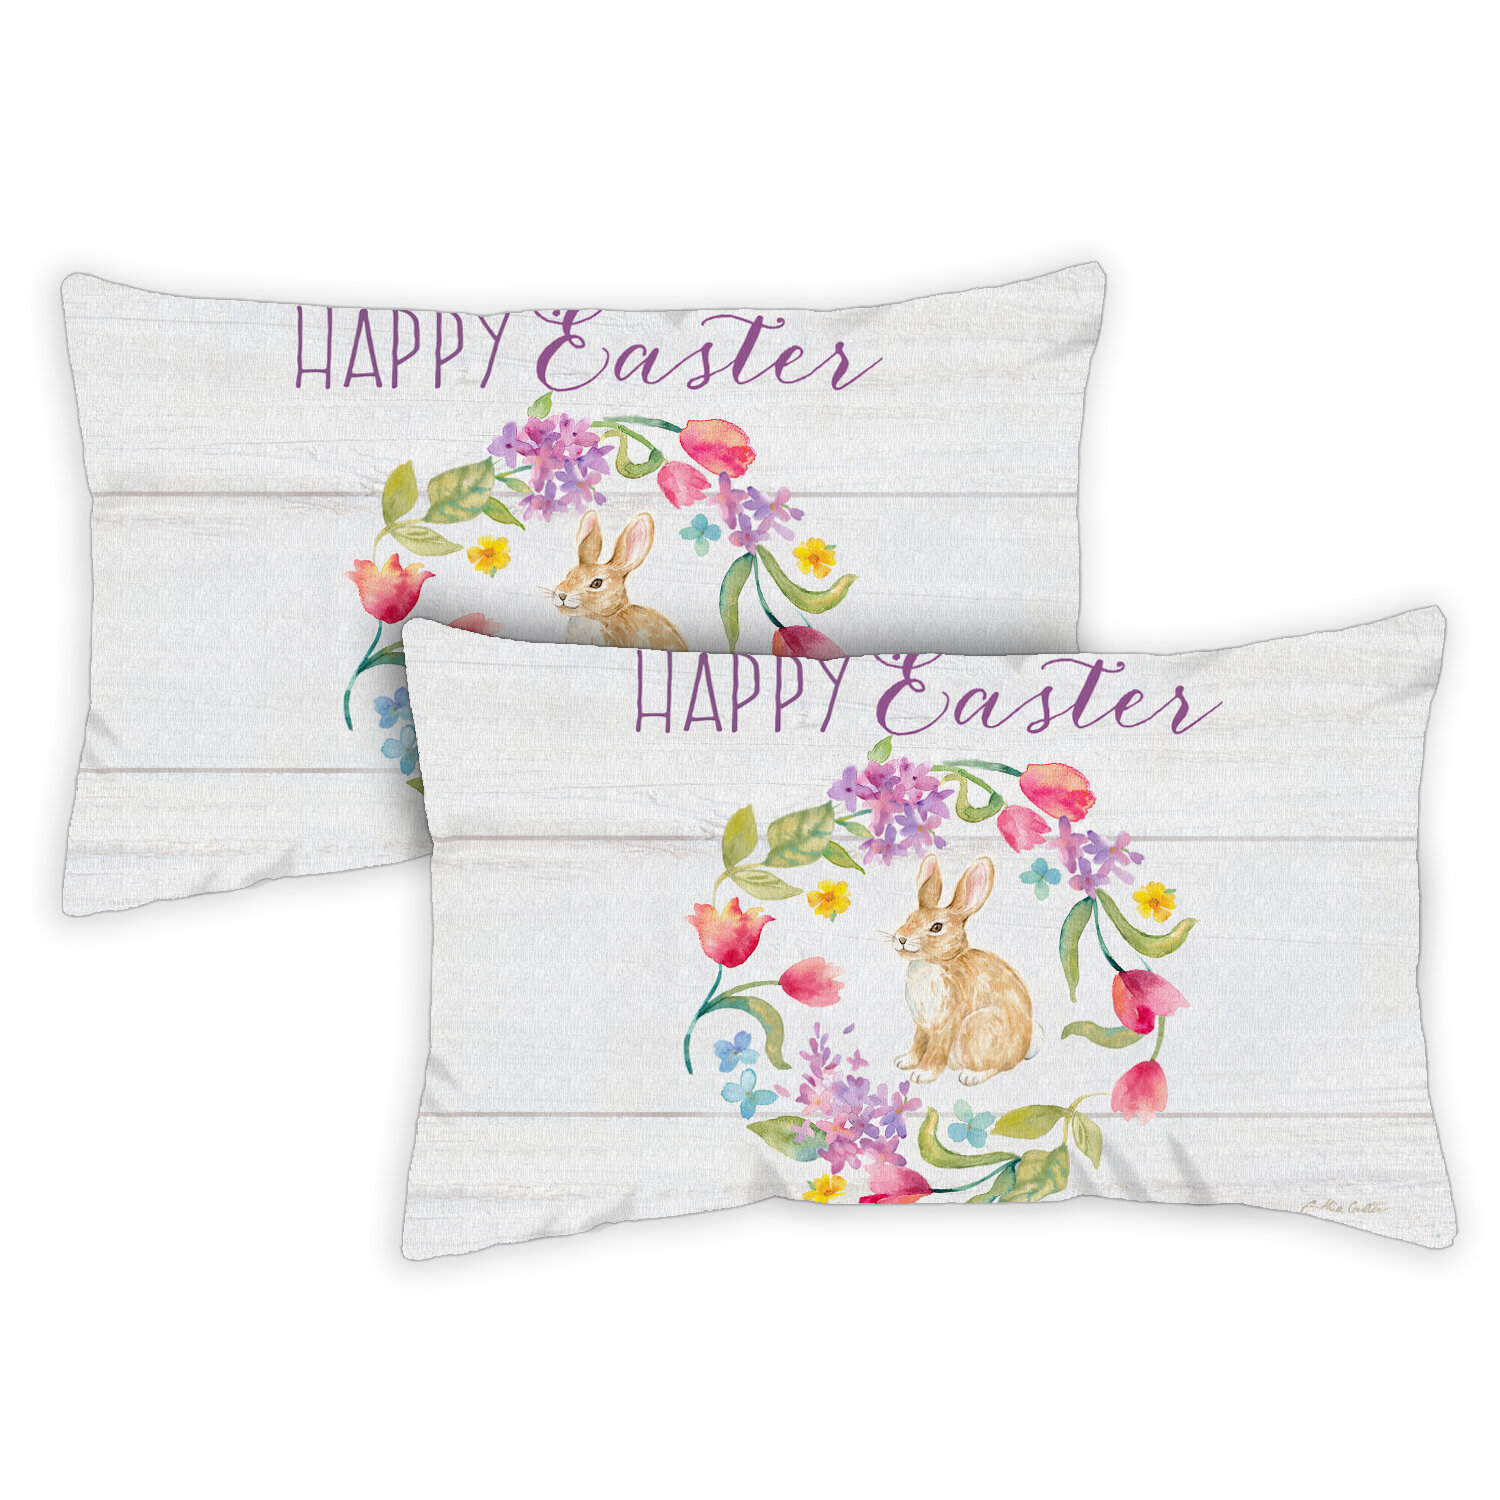 Toland 771324 Easter Bunny Wreath 12 x 19 Inch Outdoor Pillow Case Only 2-Pack